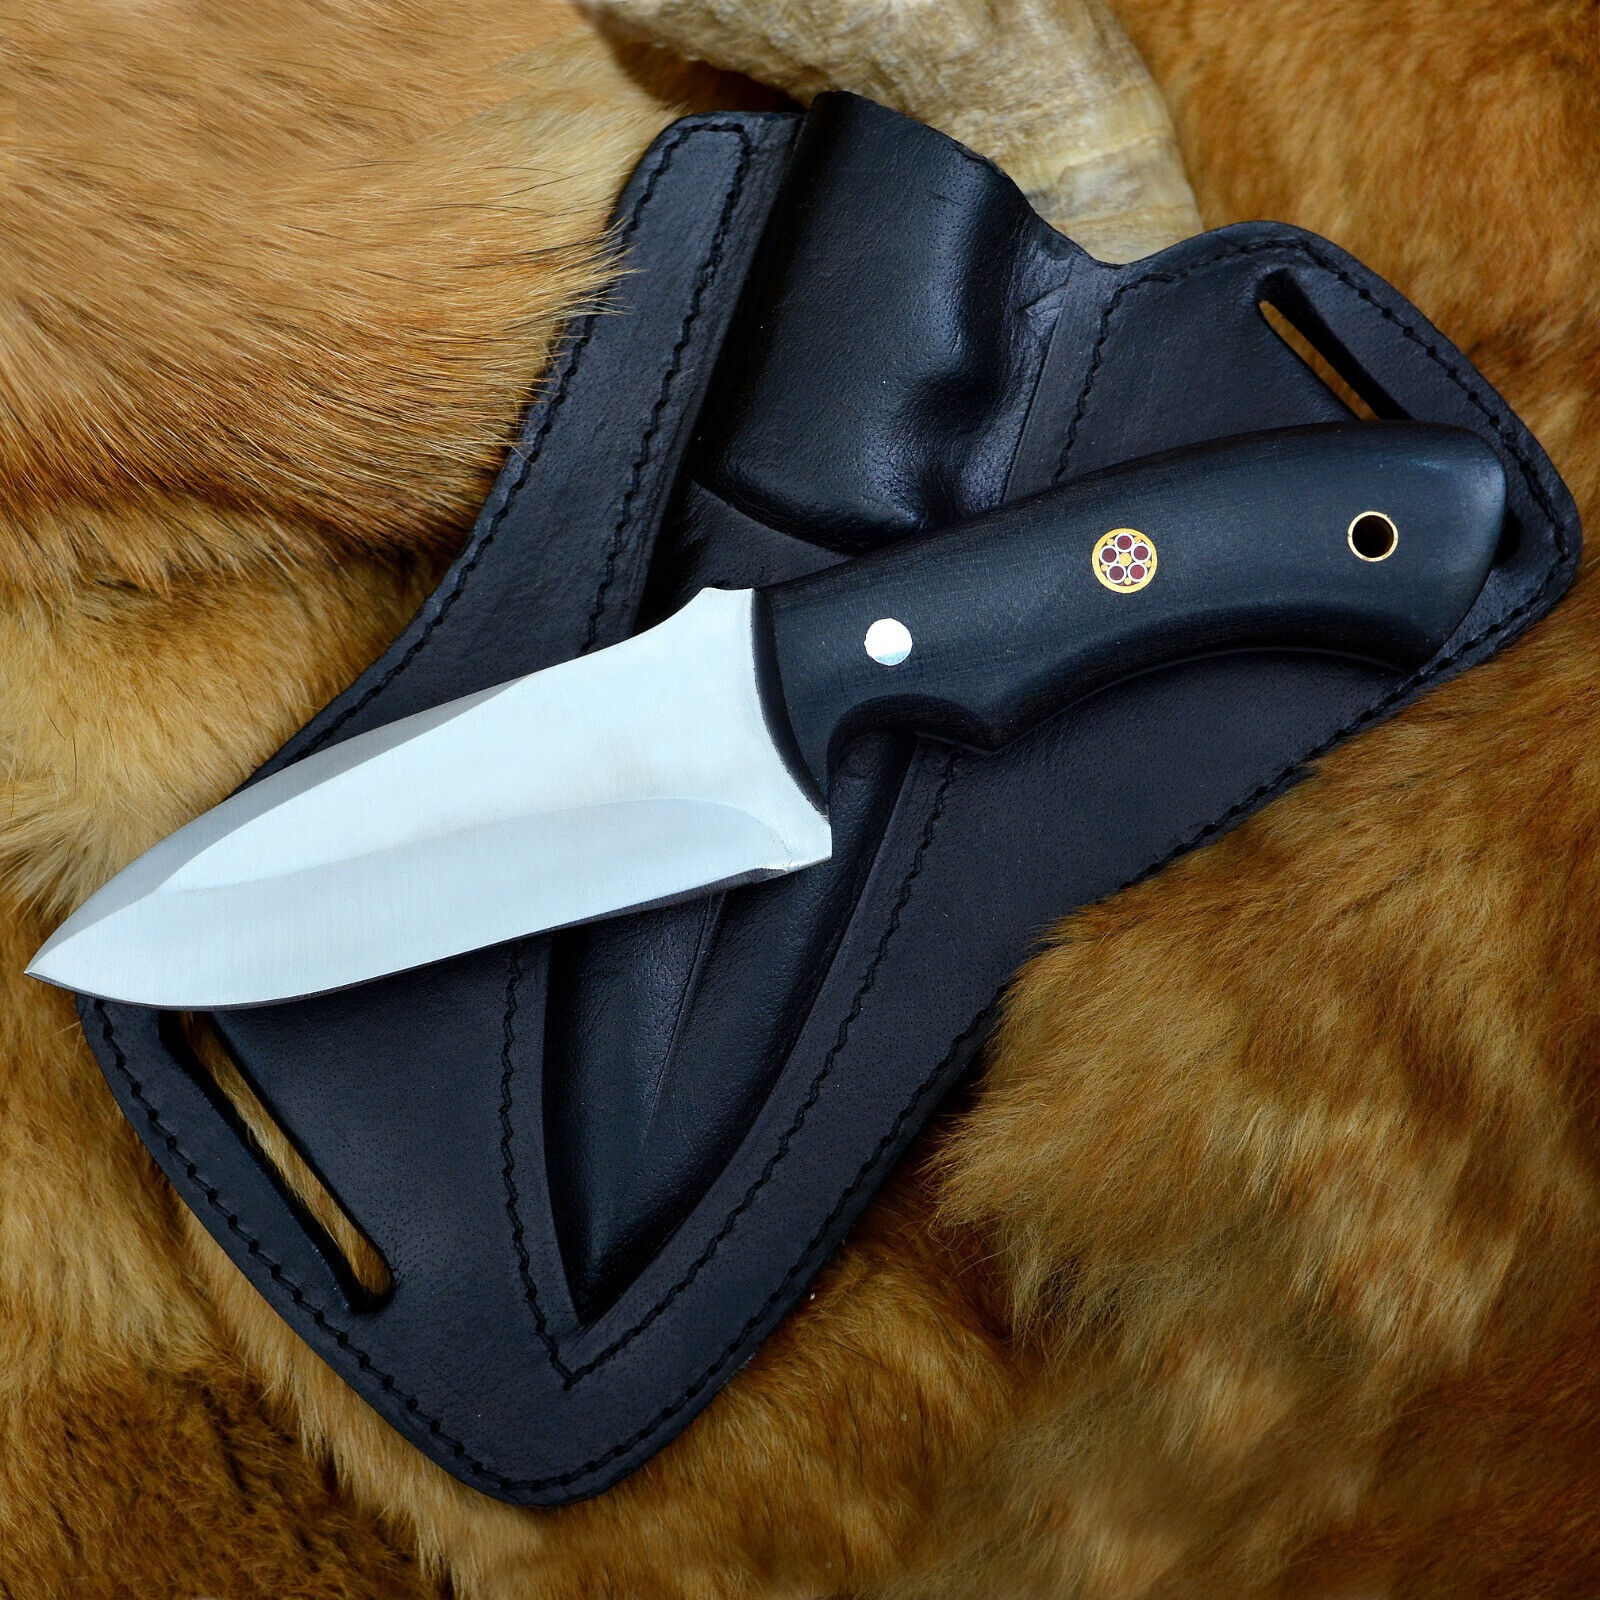 Small Hunting Knife Bowie Sharp Fixed Blade Camping Military Outdoor Survival